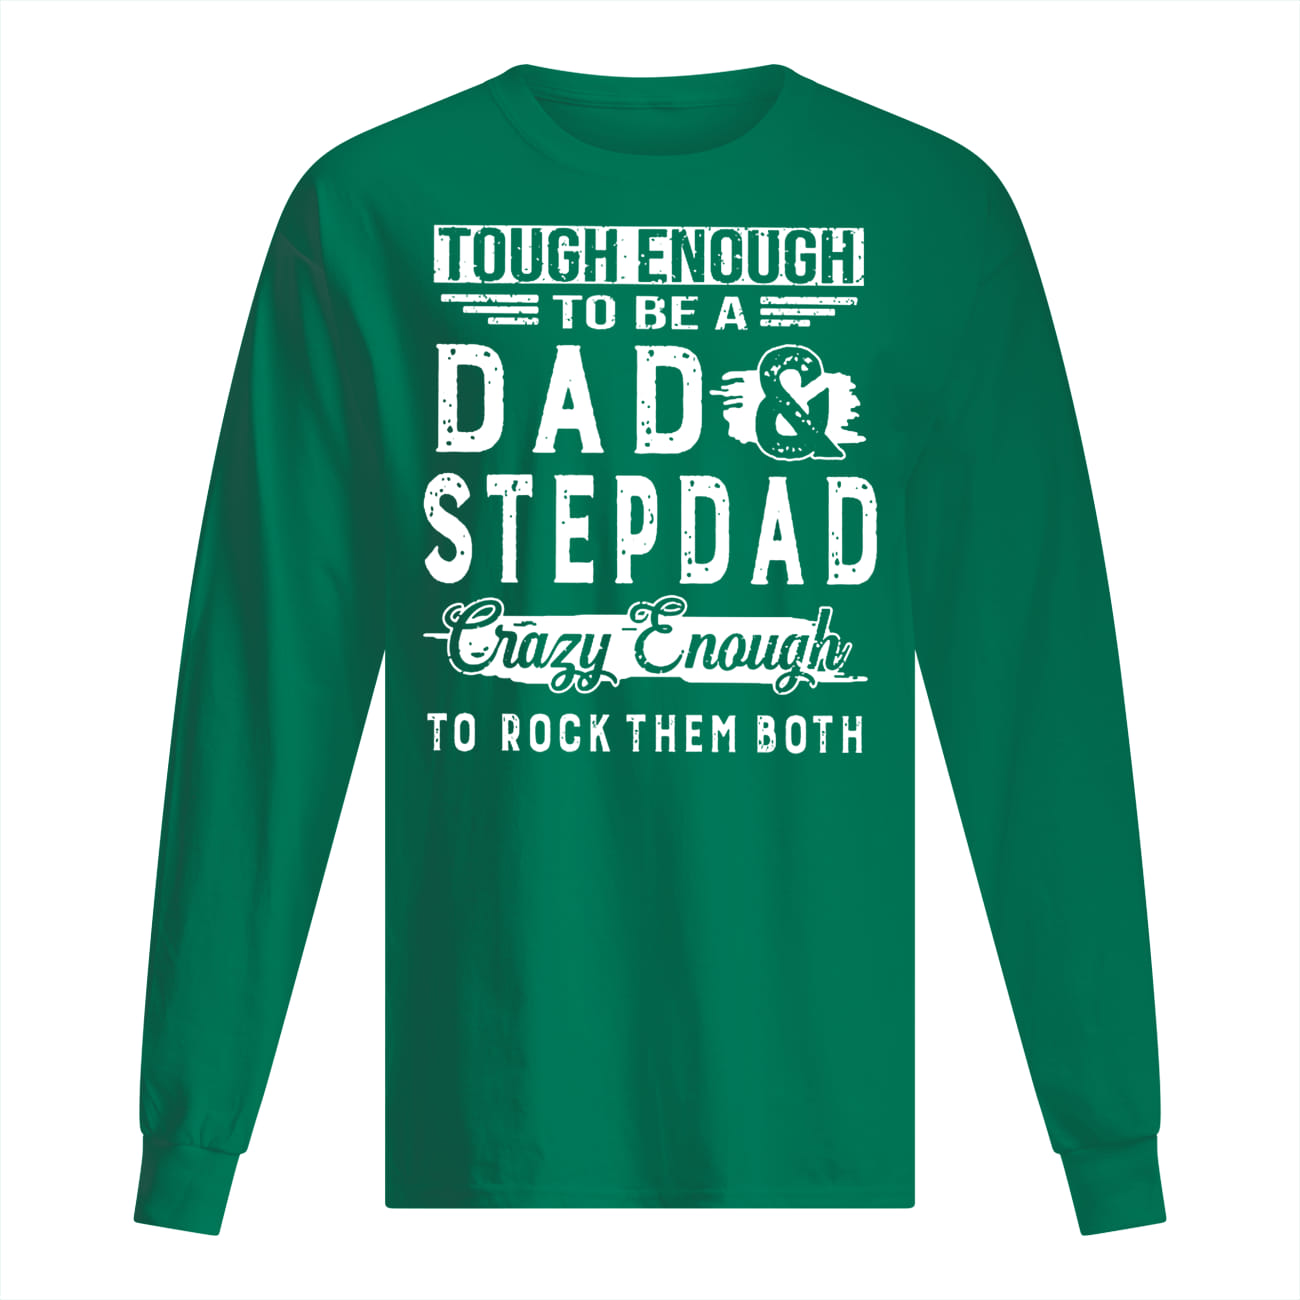 Tough enough to be a dad and stepdad crazy enough to rock them both longsleeve